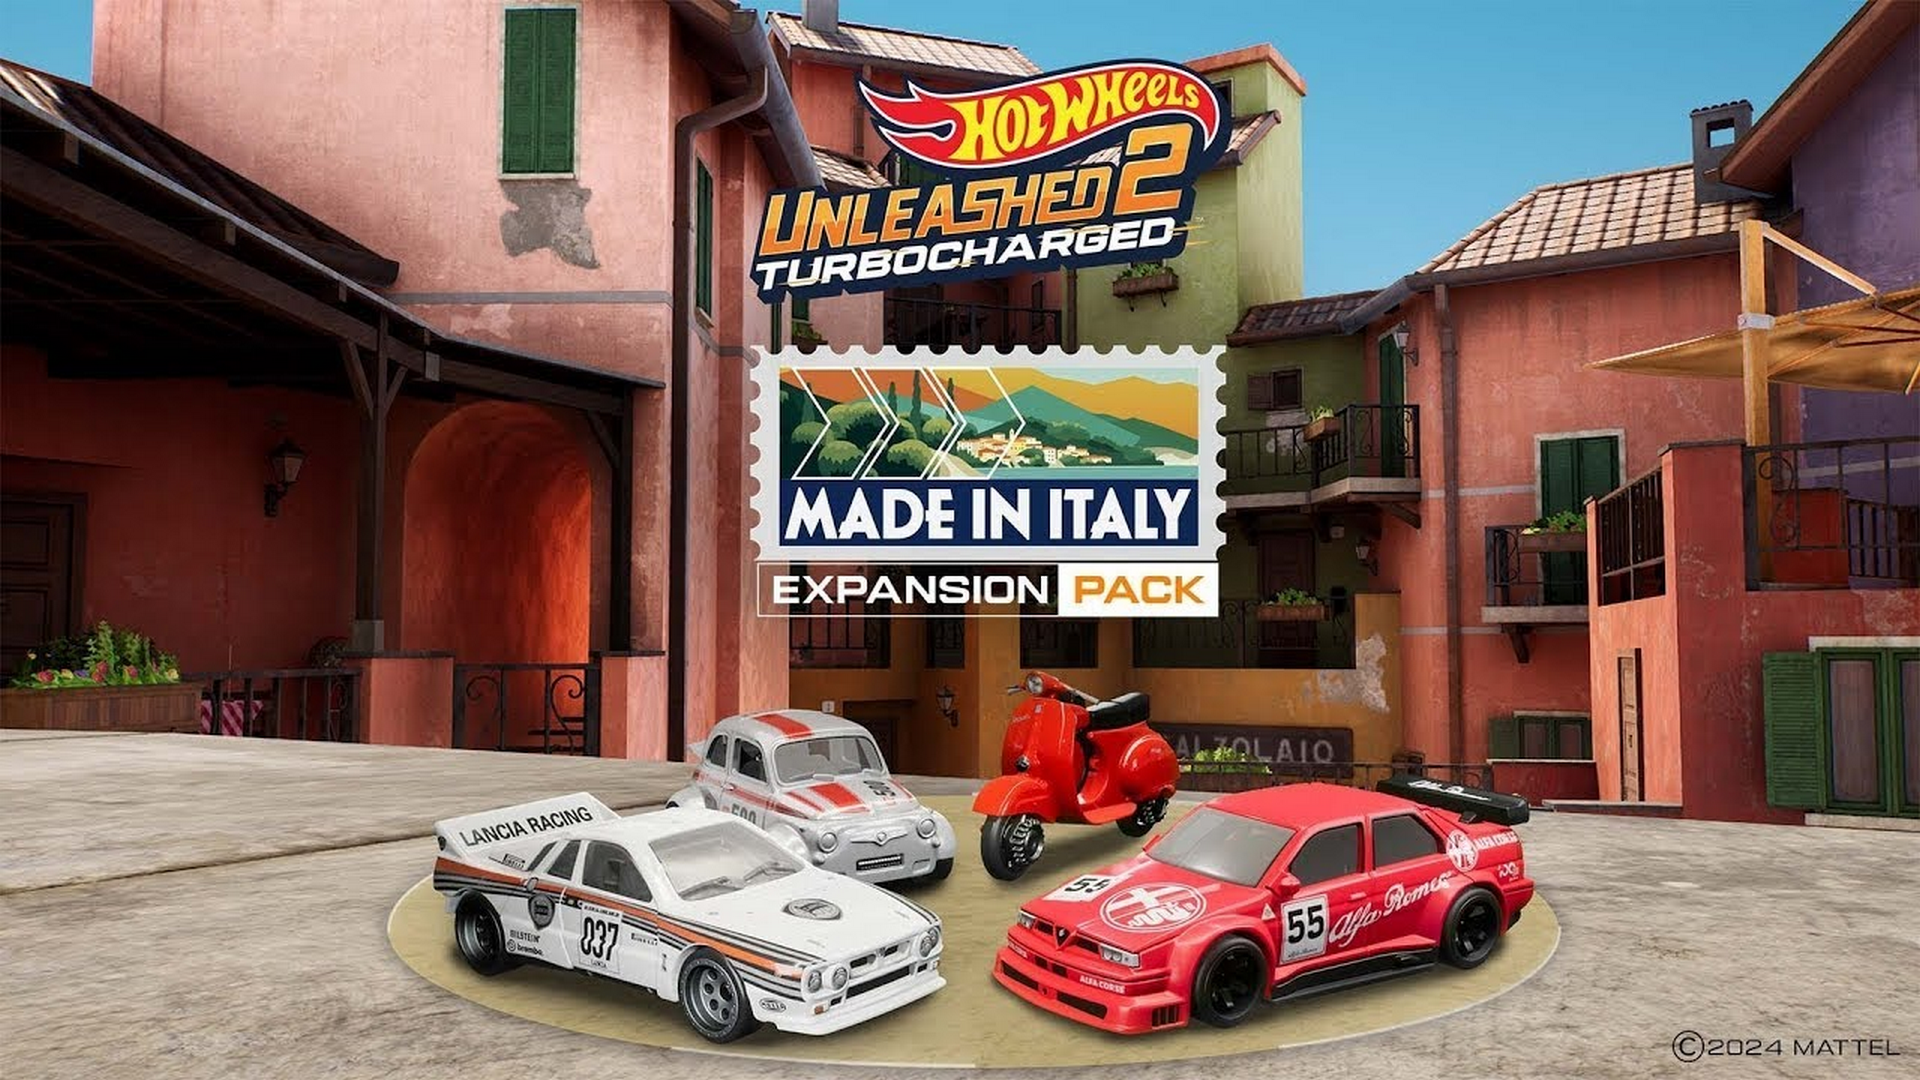 Rule The “Dolce Vita” With New Made In Italy Expansion Pack For Hot Wheels Unleashed 2 – Turbocharged